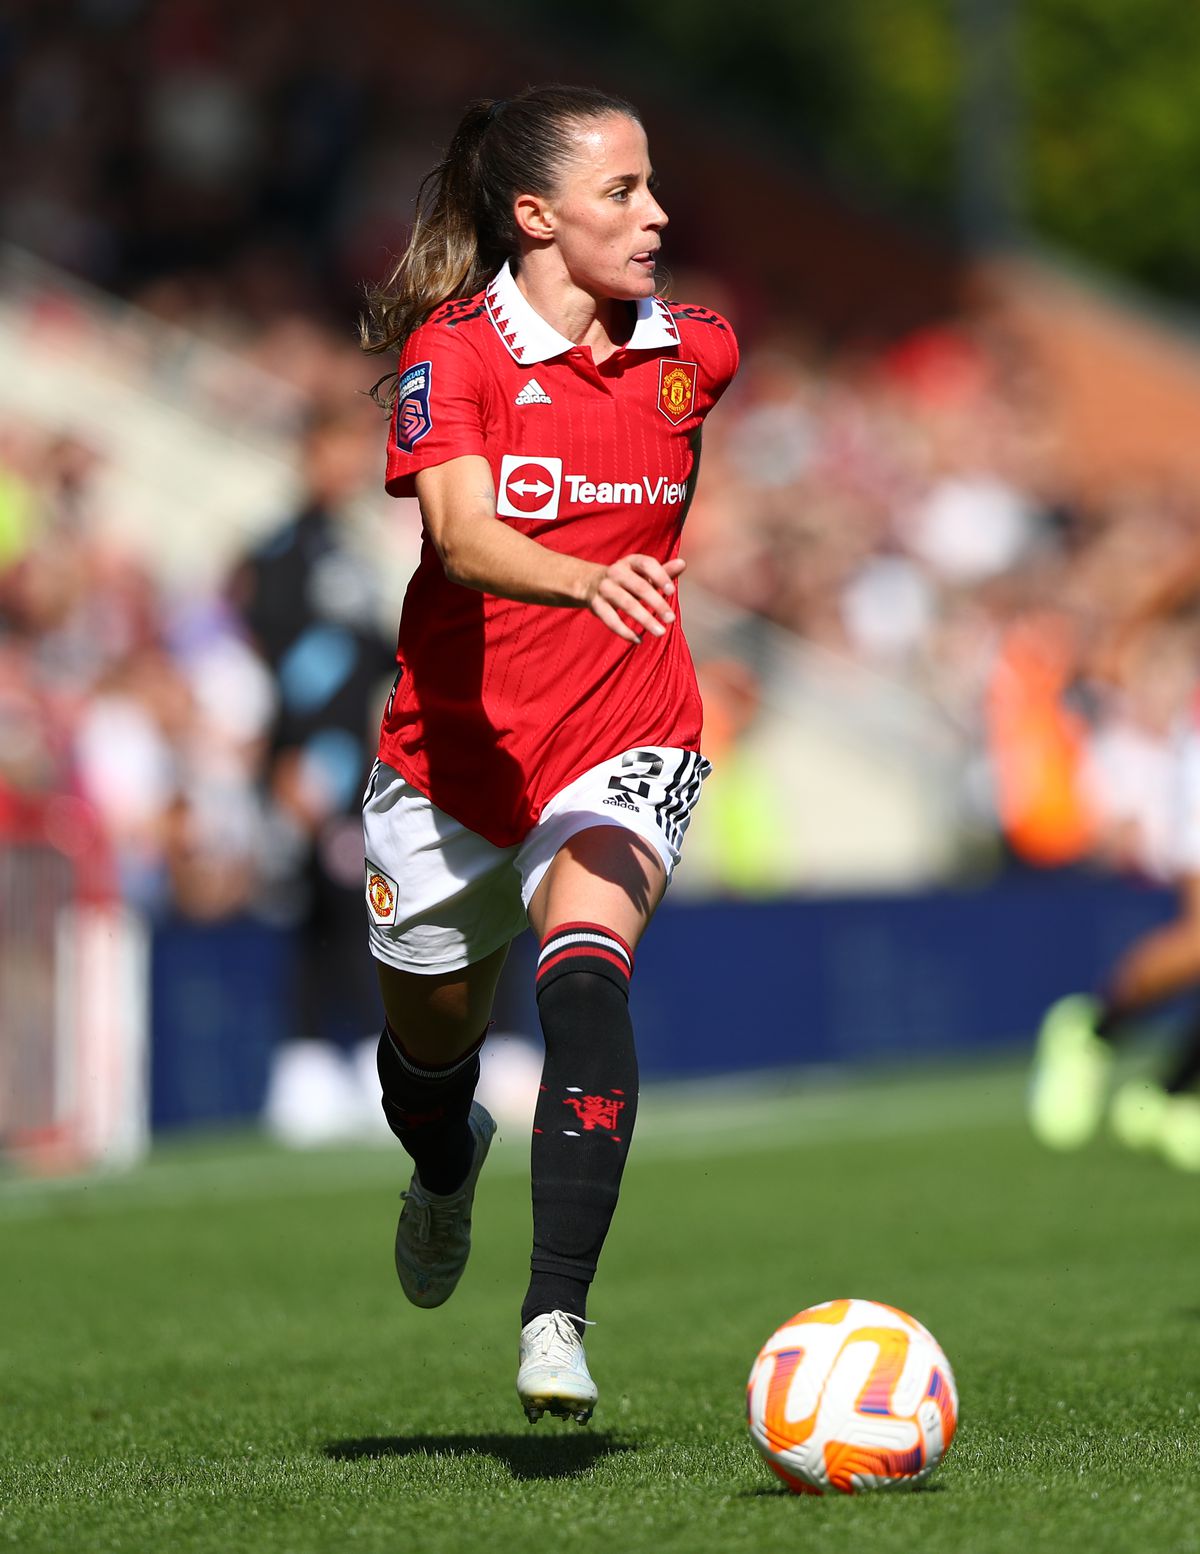 Manchester United v Reading - Women’s Super League - Leigh Sports Village